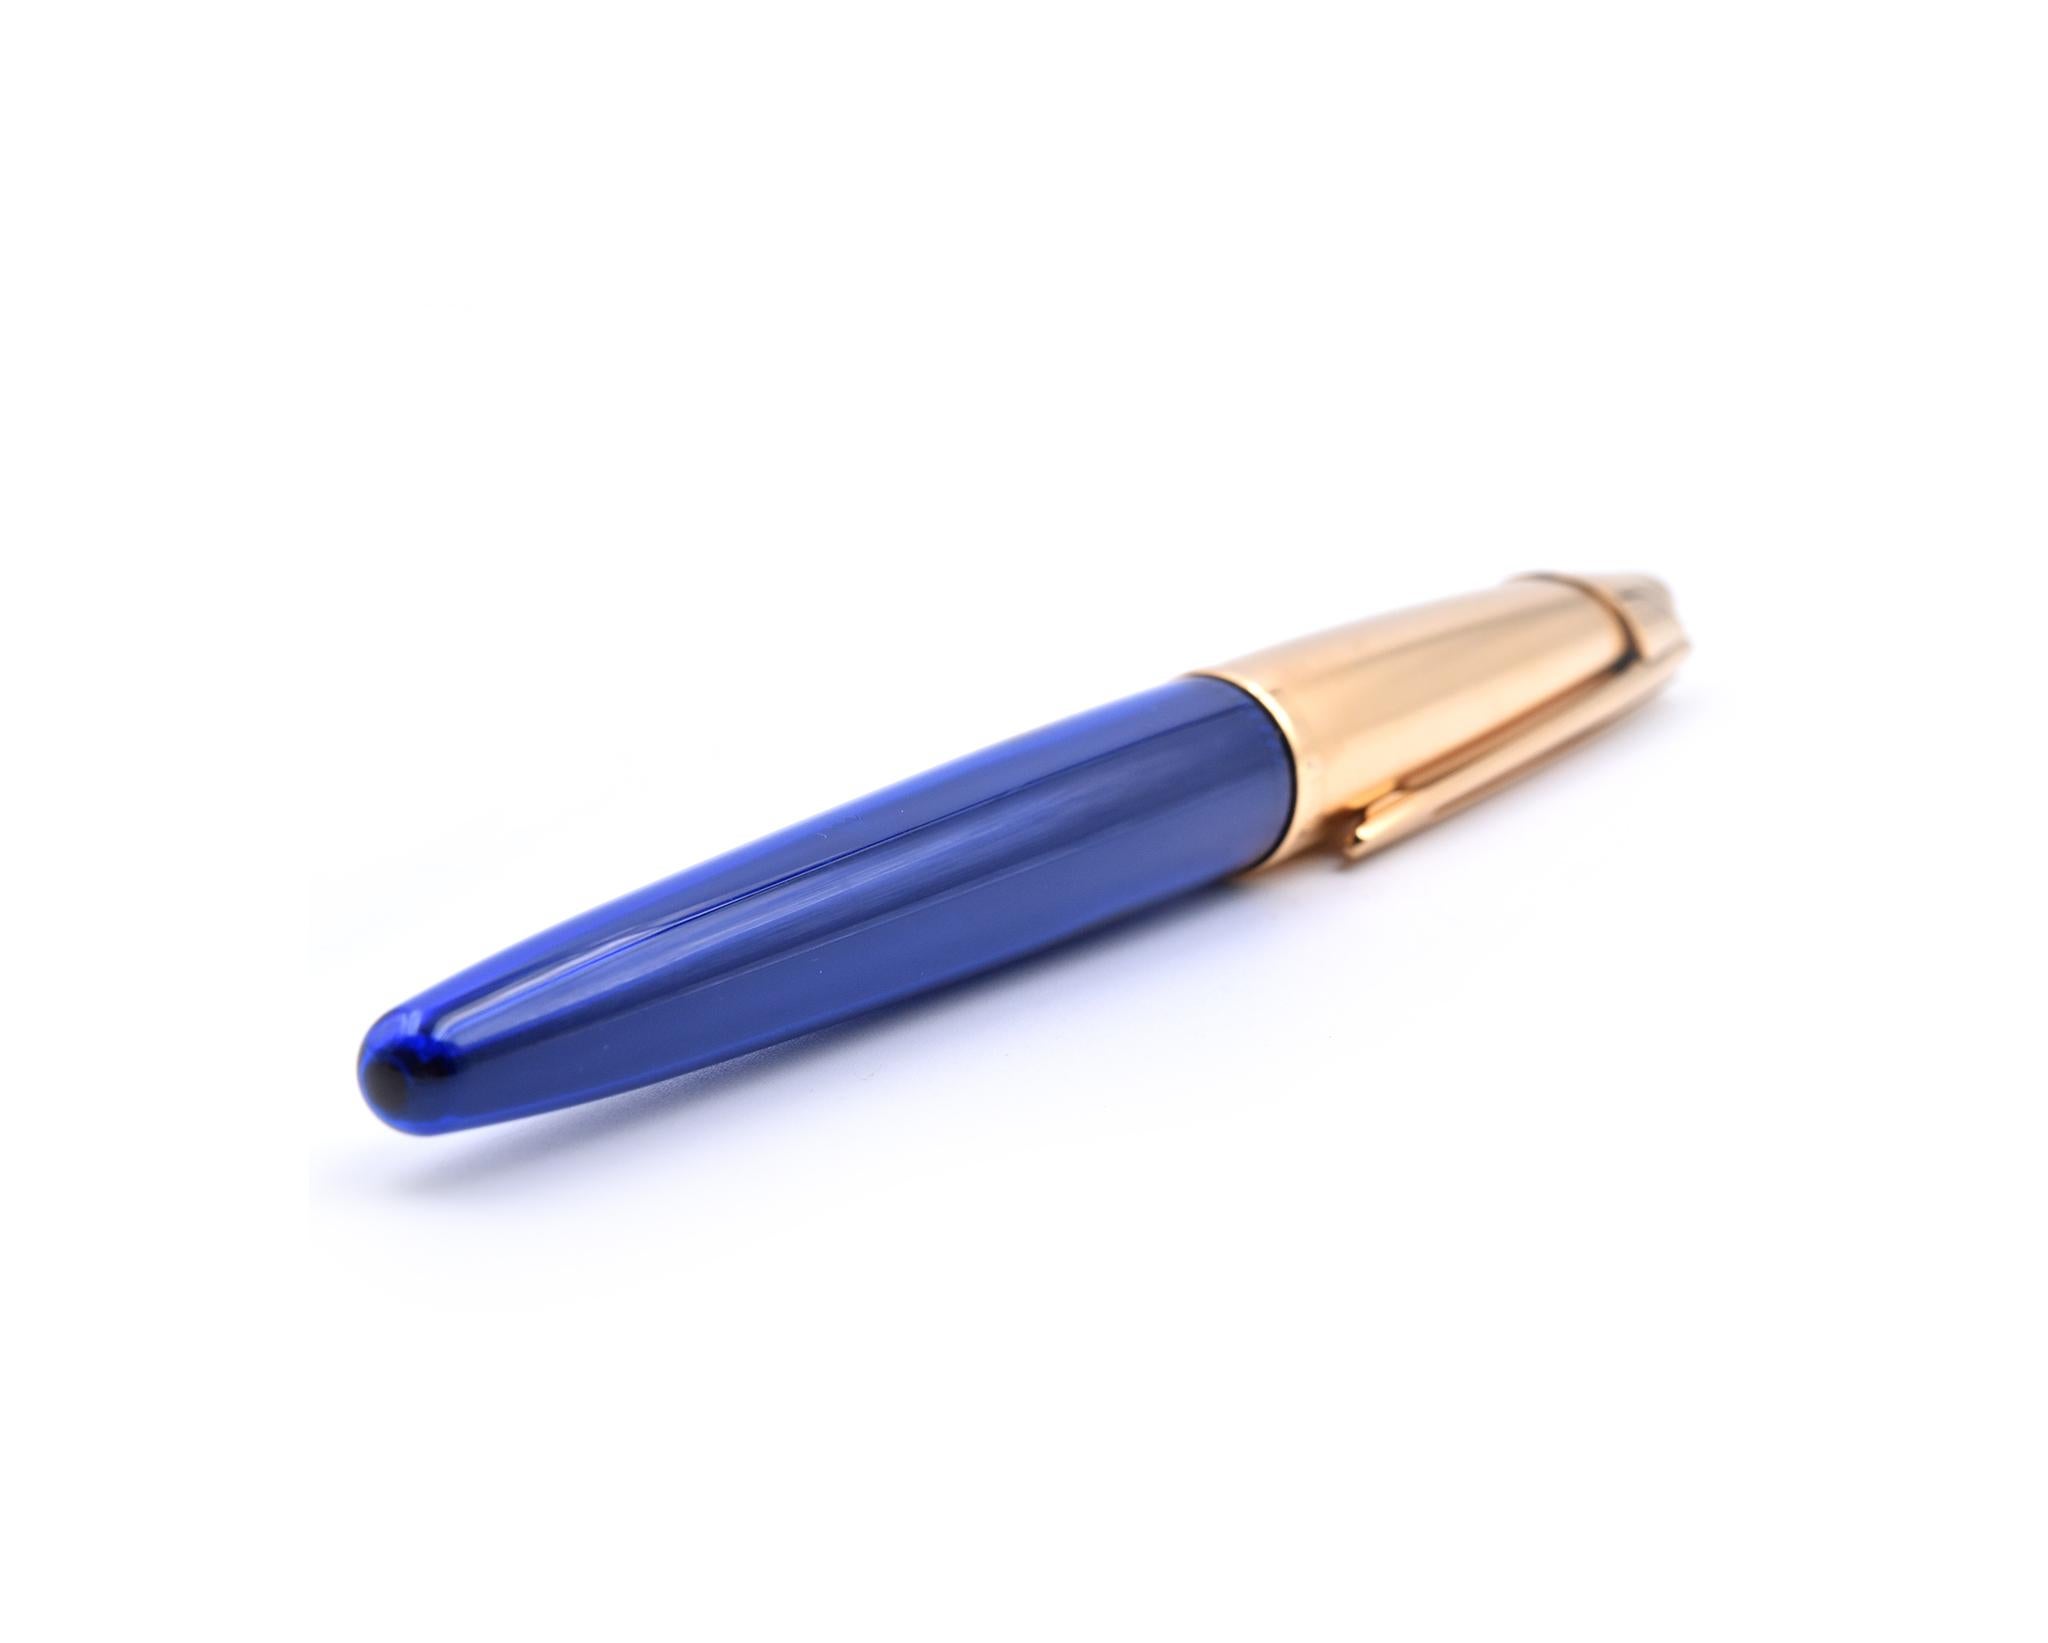 Designer: Waterman Paris
Dimensions: pen measures 6-inches long
Weight: 45.98 grams

Comes with Box and Paperwork.
